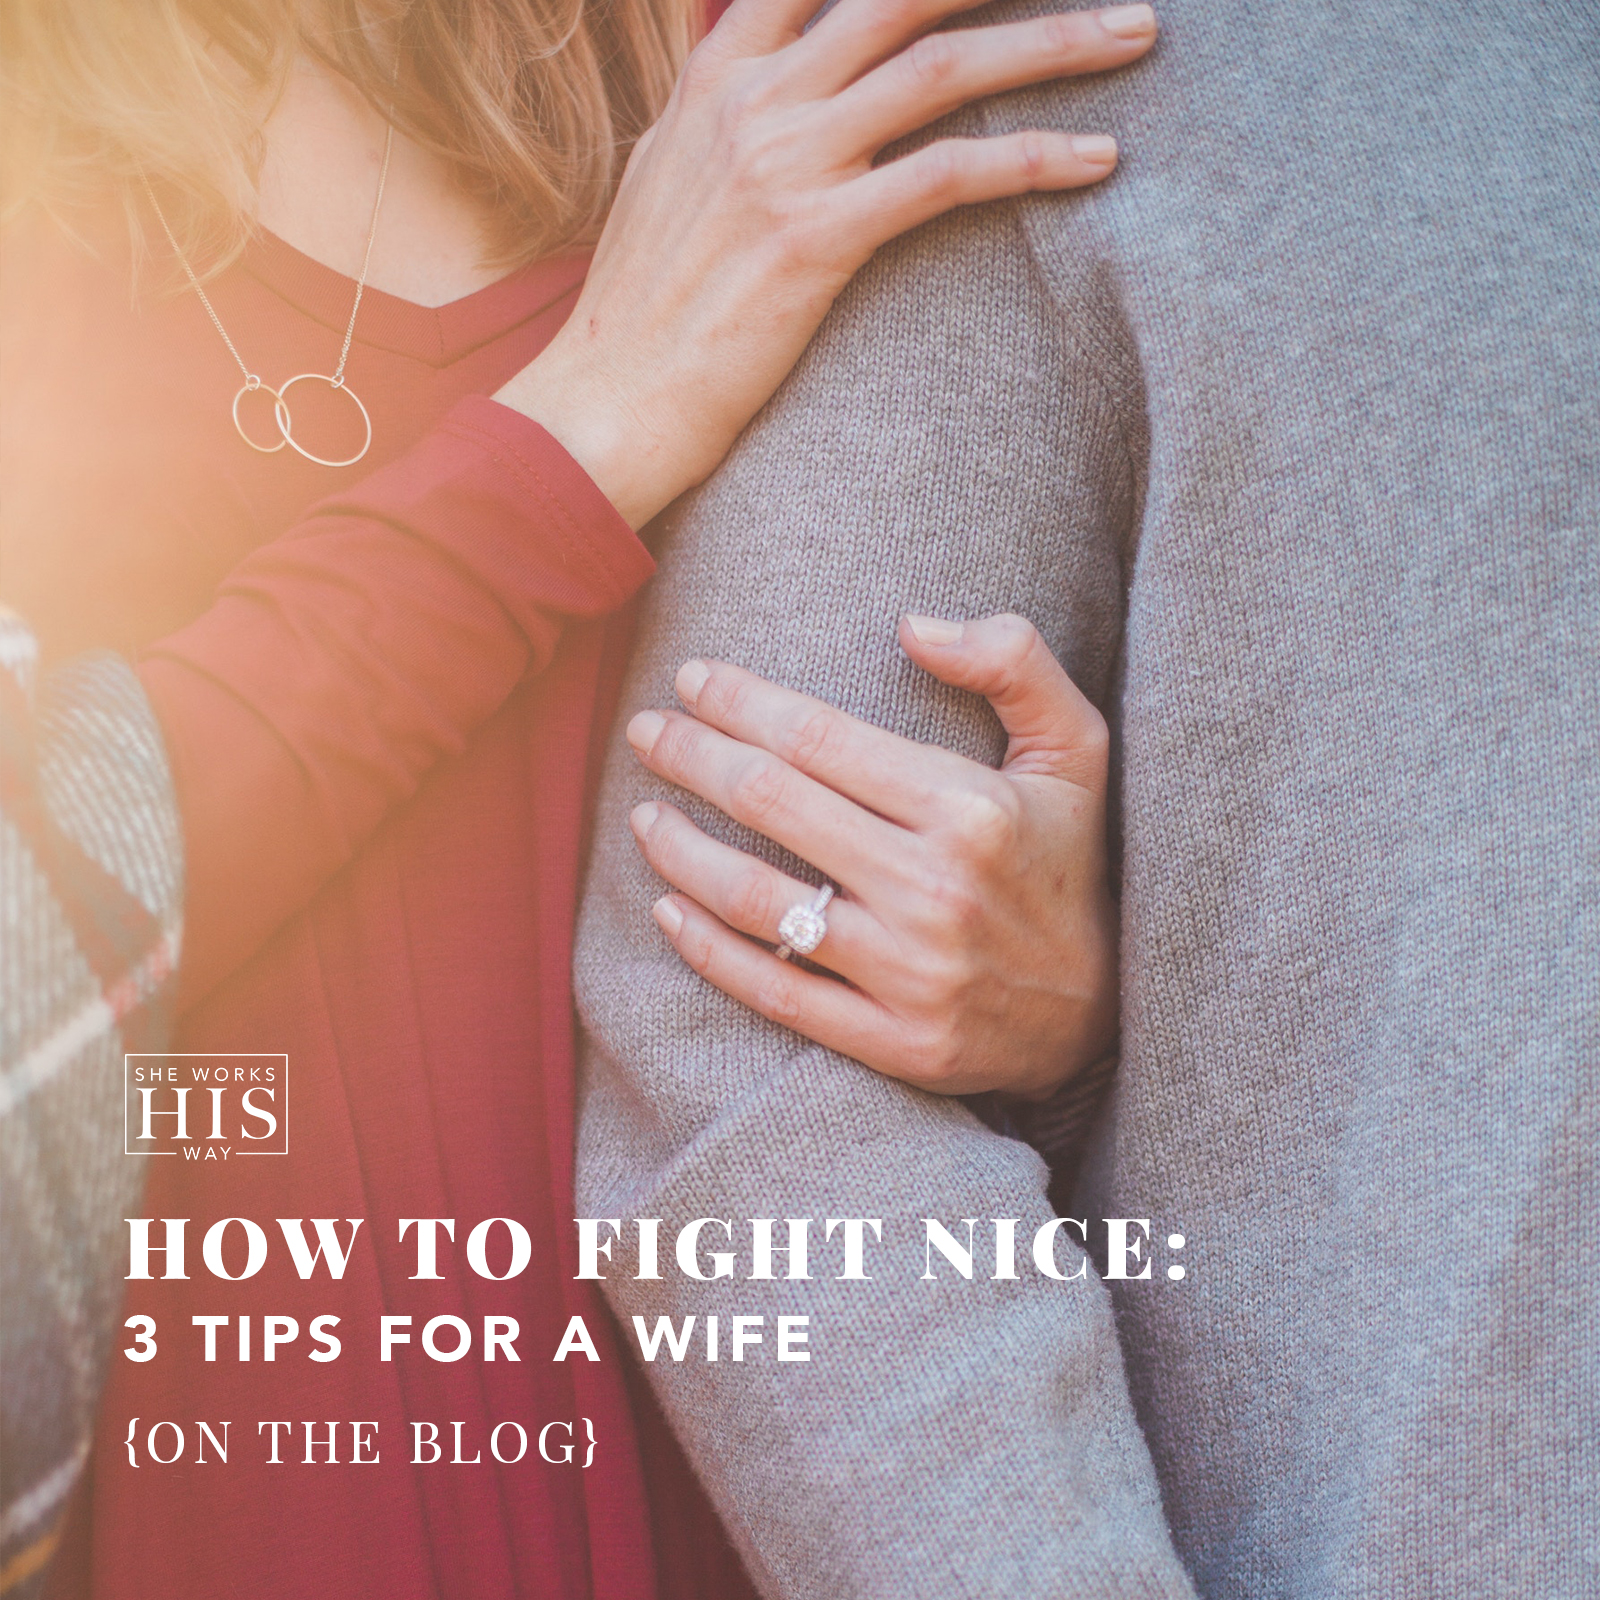 How to Fight Nice: 3 Tips For a Wife